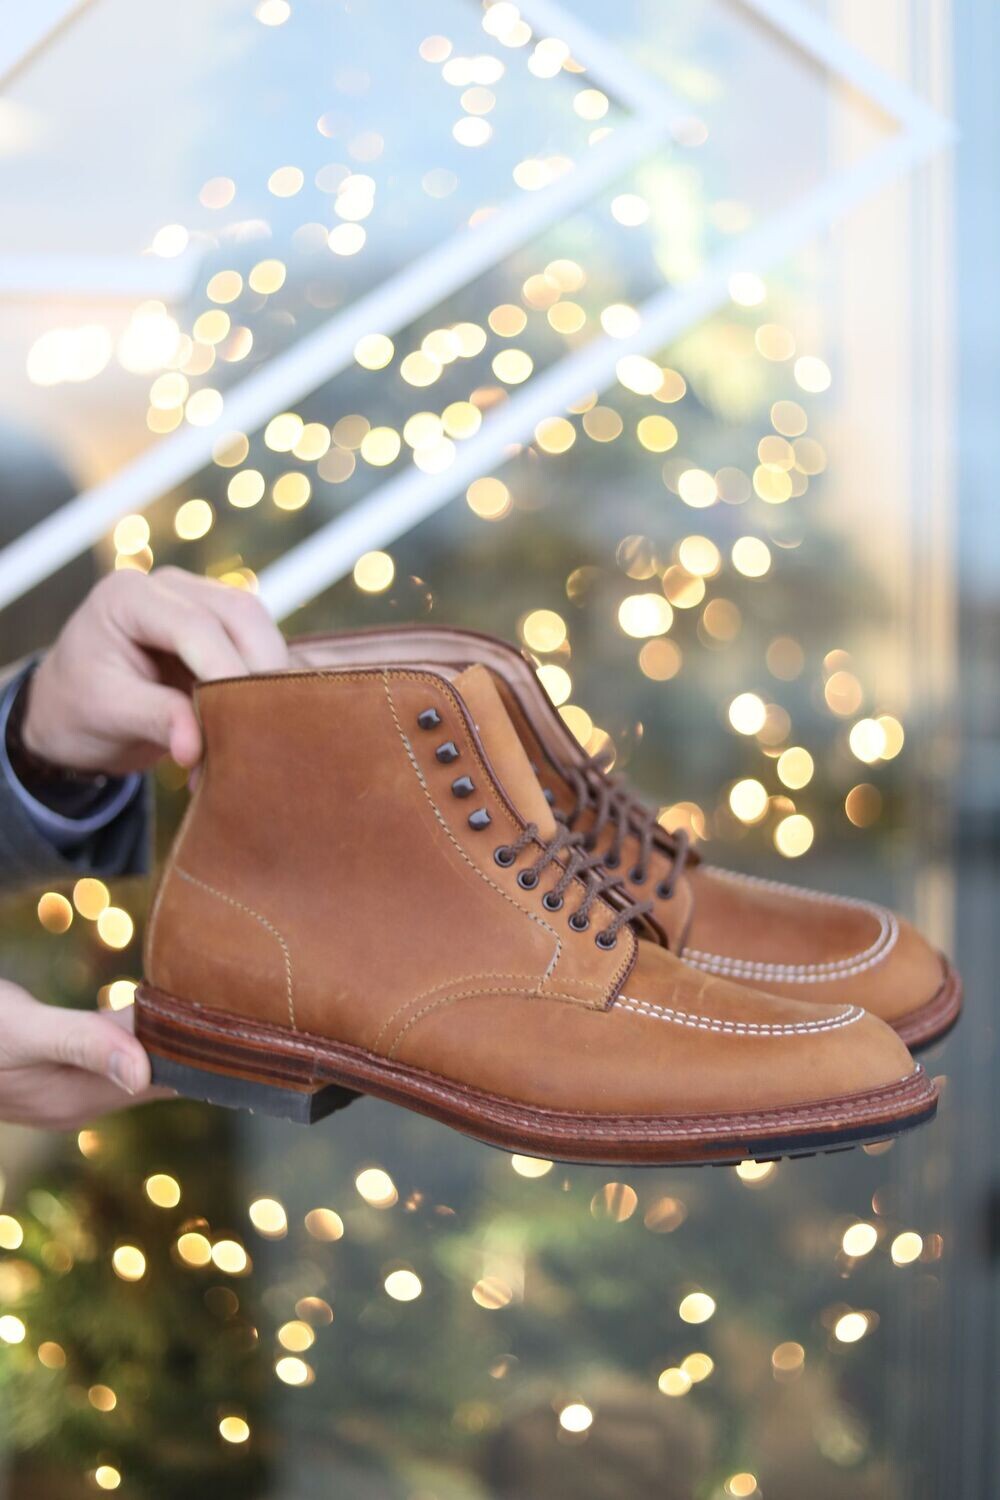 Alden x Zahner's Clothiers "The Voyager" Tan Smooth Chamois Indy Boot